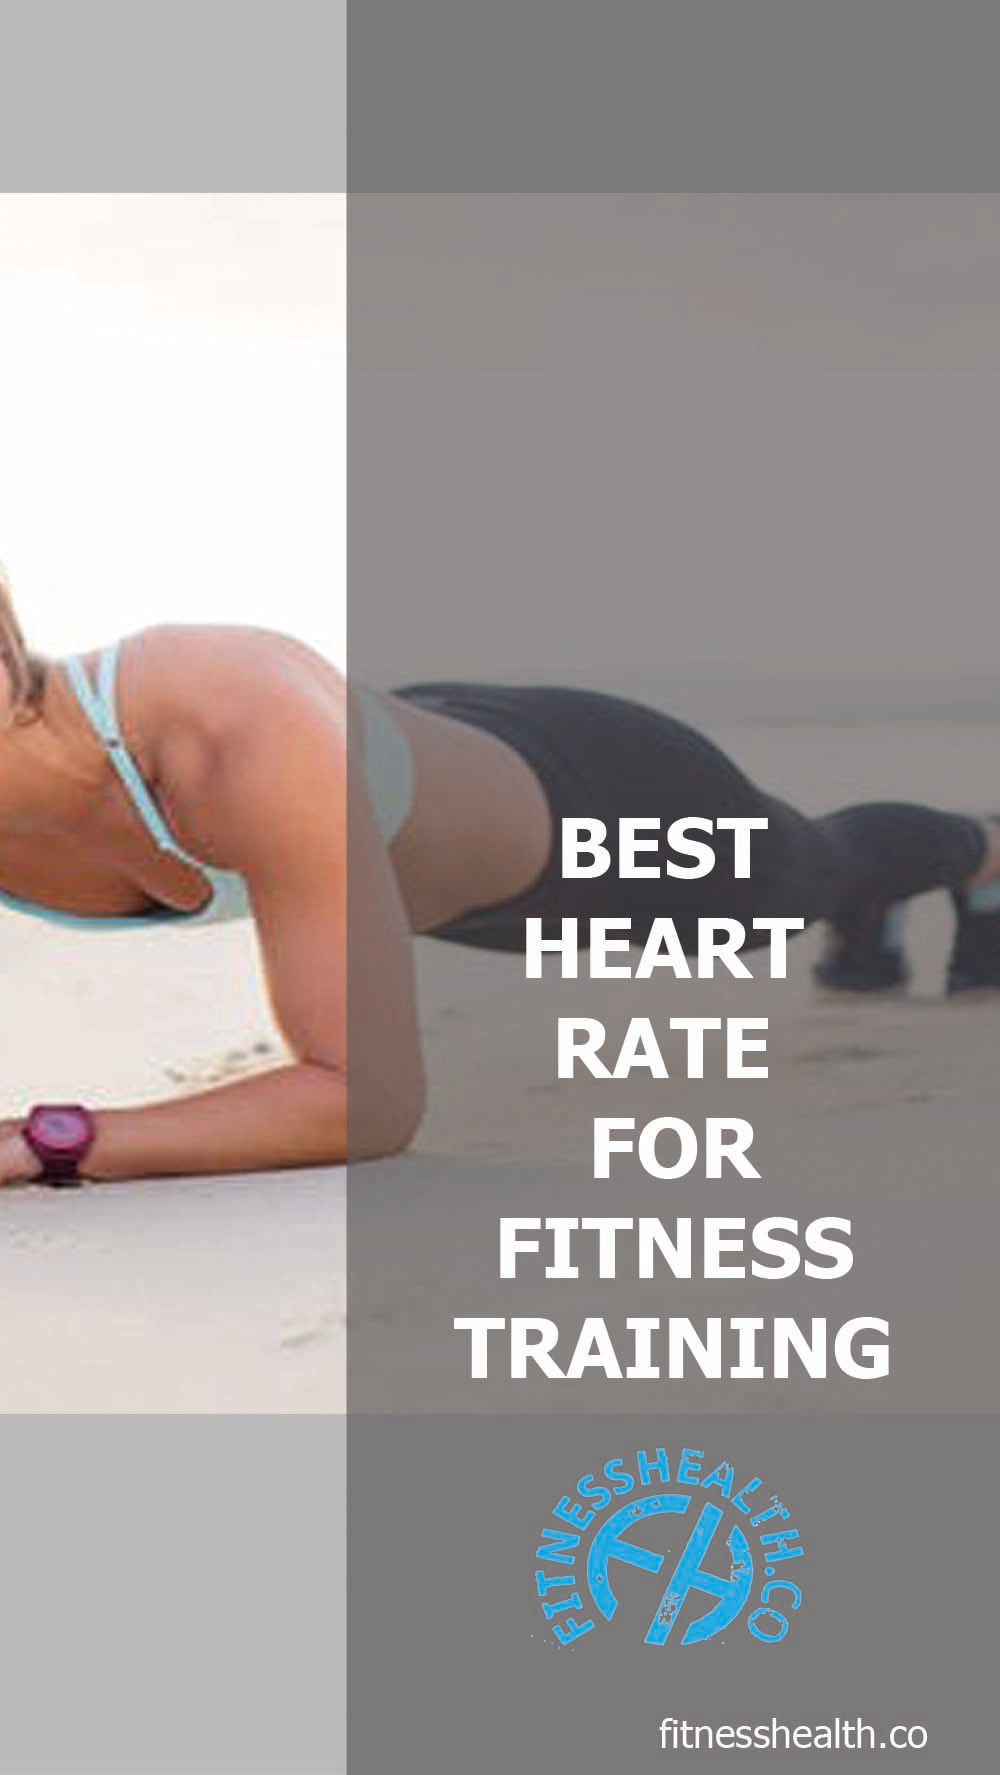 BEST HEART RATE FOR FITNESS TRAINING